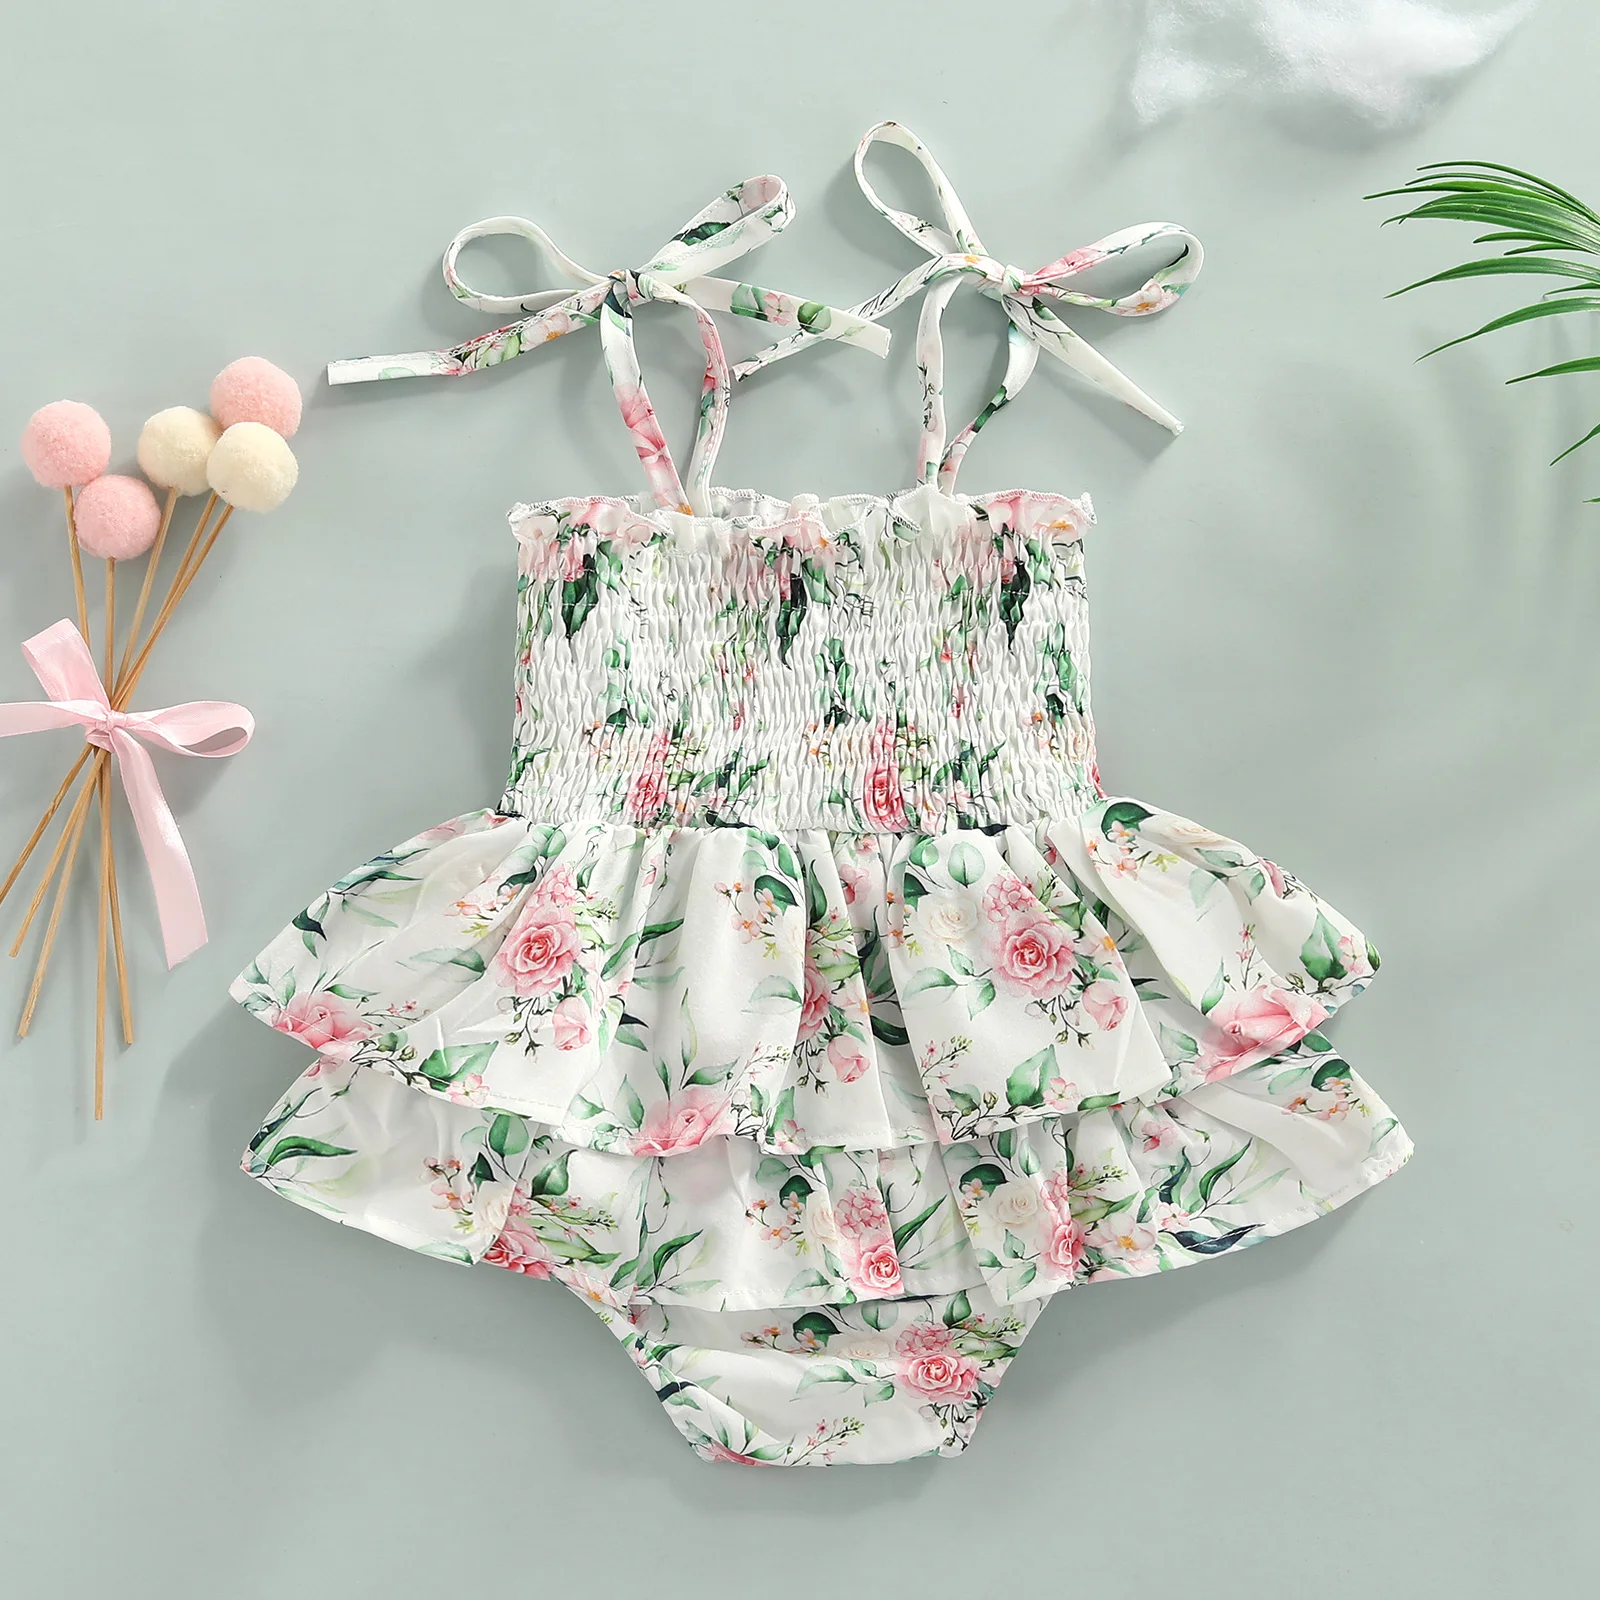 ma&baby 0-18M Newborn Infant Baby Girls Romper Floral Print Ruffle Jumpsuit Playsuit Summer Clothes Costuems D01 black baby bodysuits	